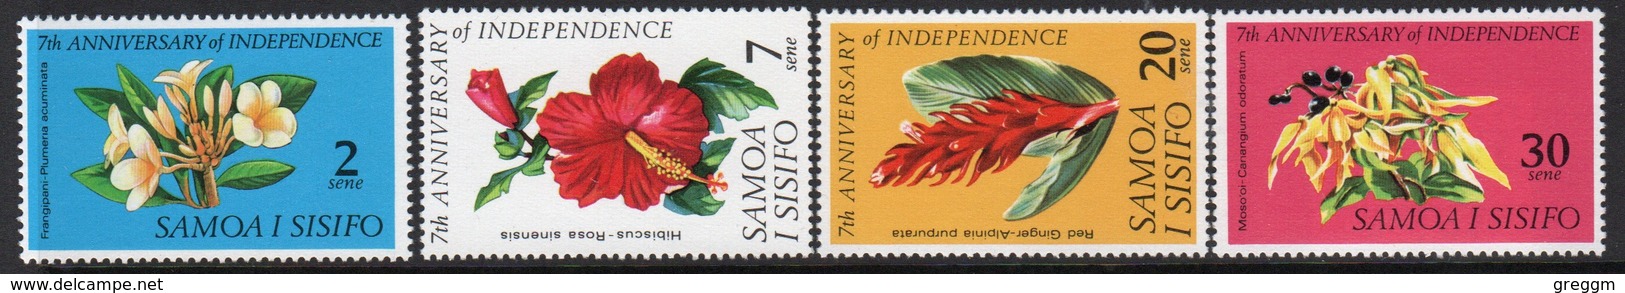 Samoa Set Of Stamps From 1969 To Celebrate 7th Anniversary Of Independence. - Samoa